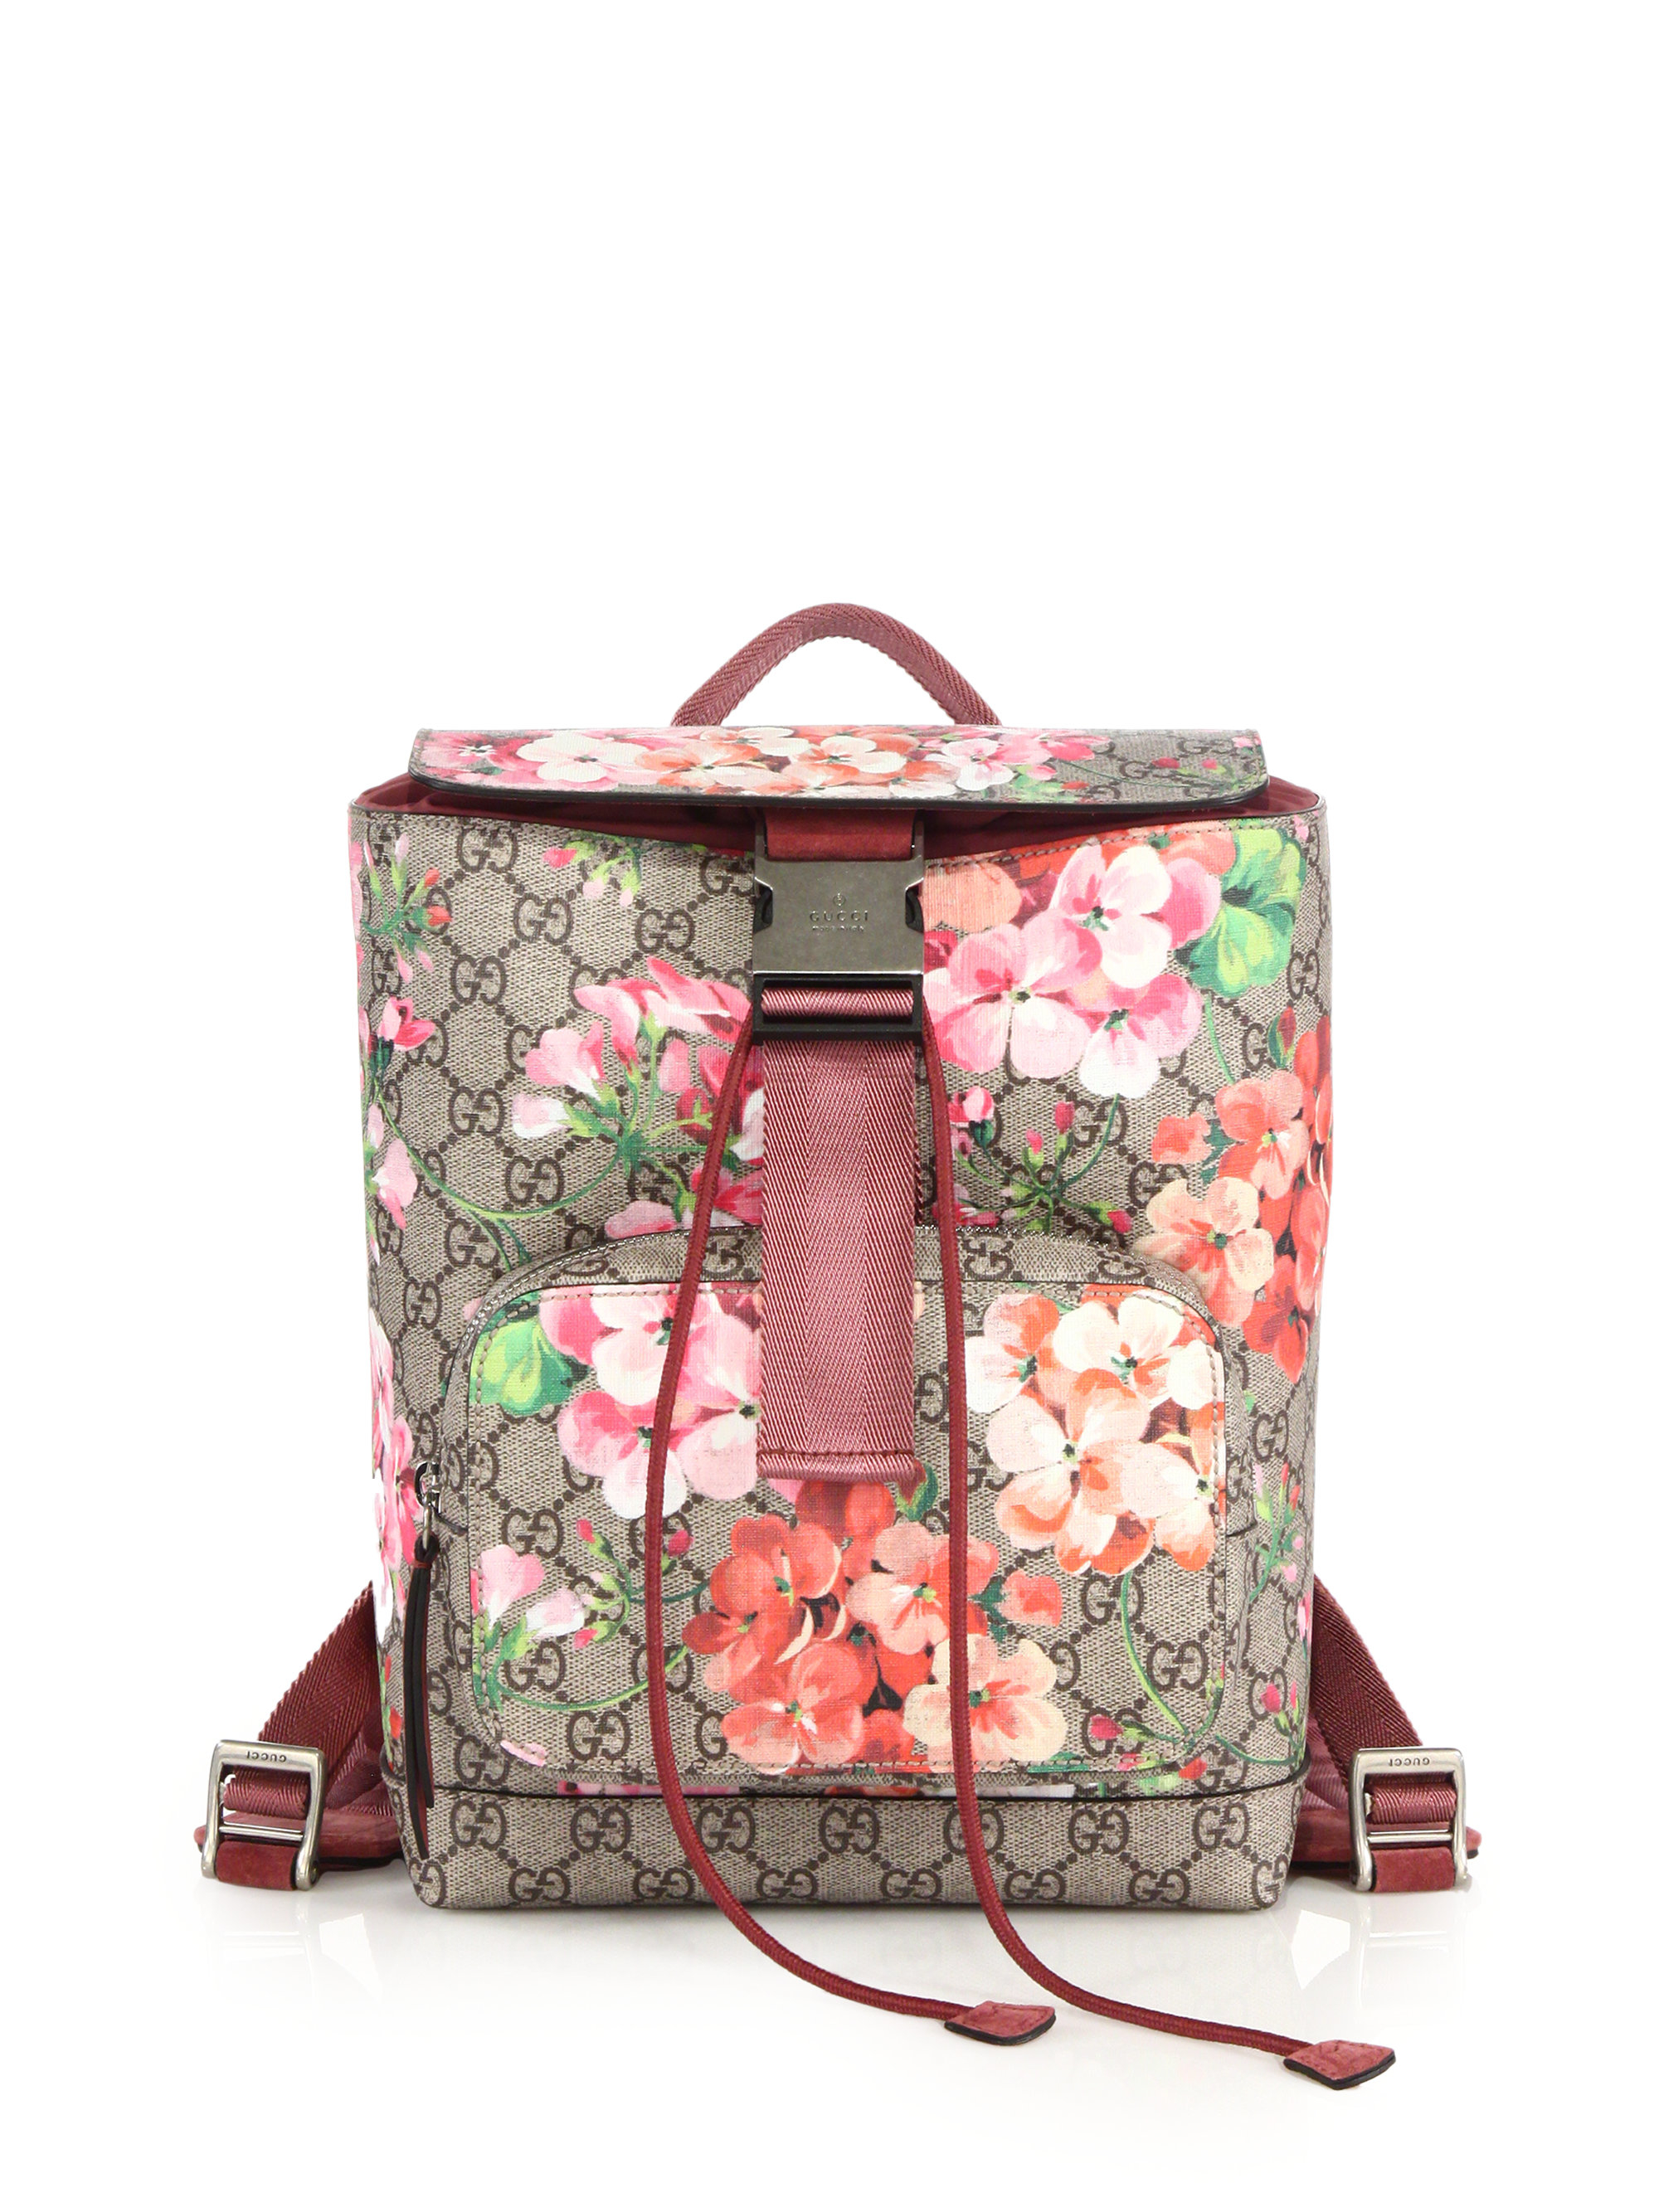 Gucci Suede Gg Blooms Small Backpack in Rose-Beige (Pink) - Lyst